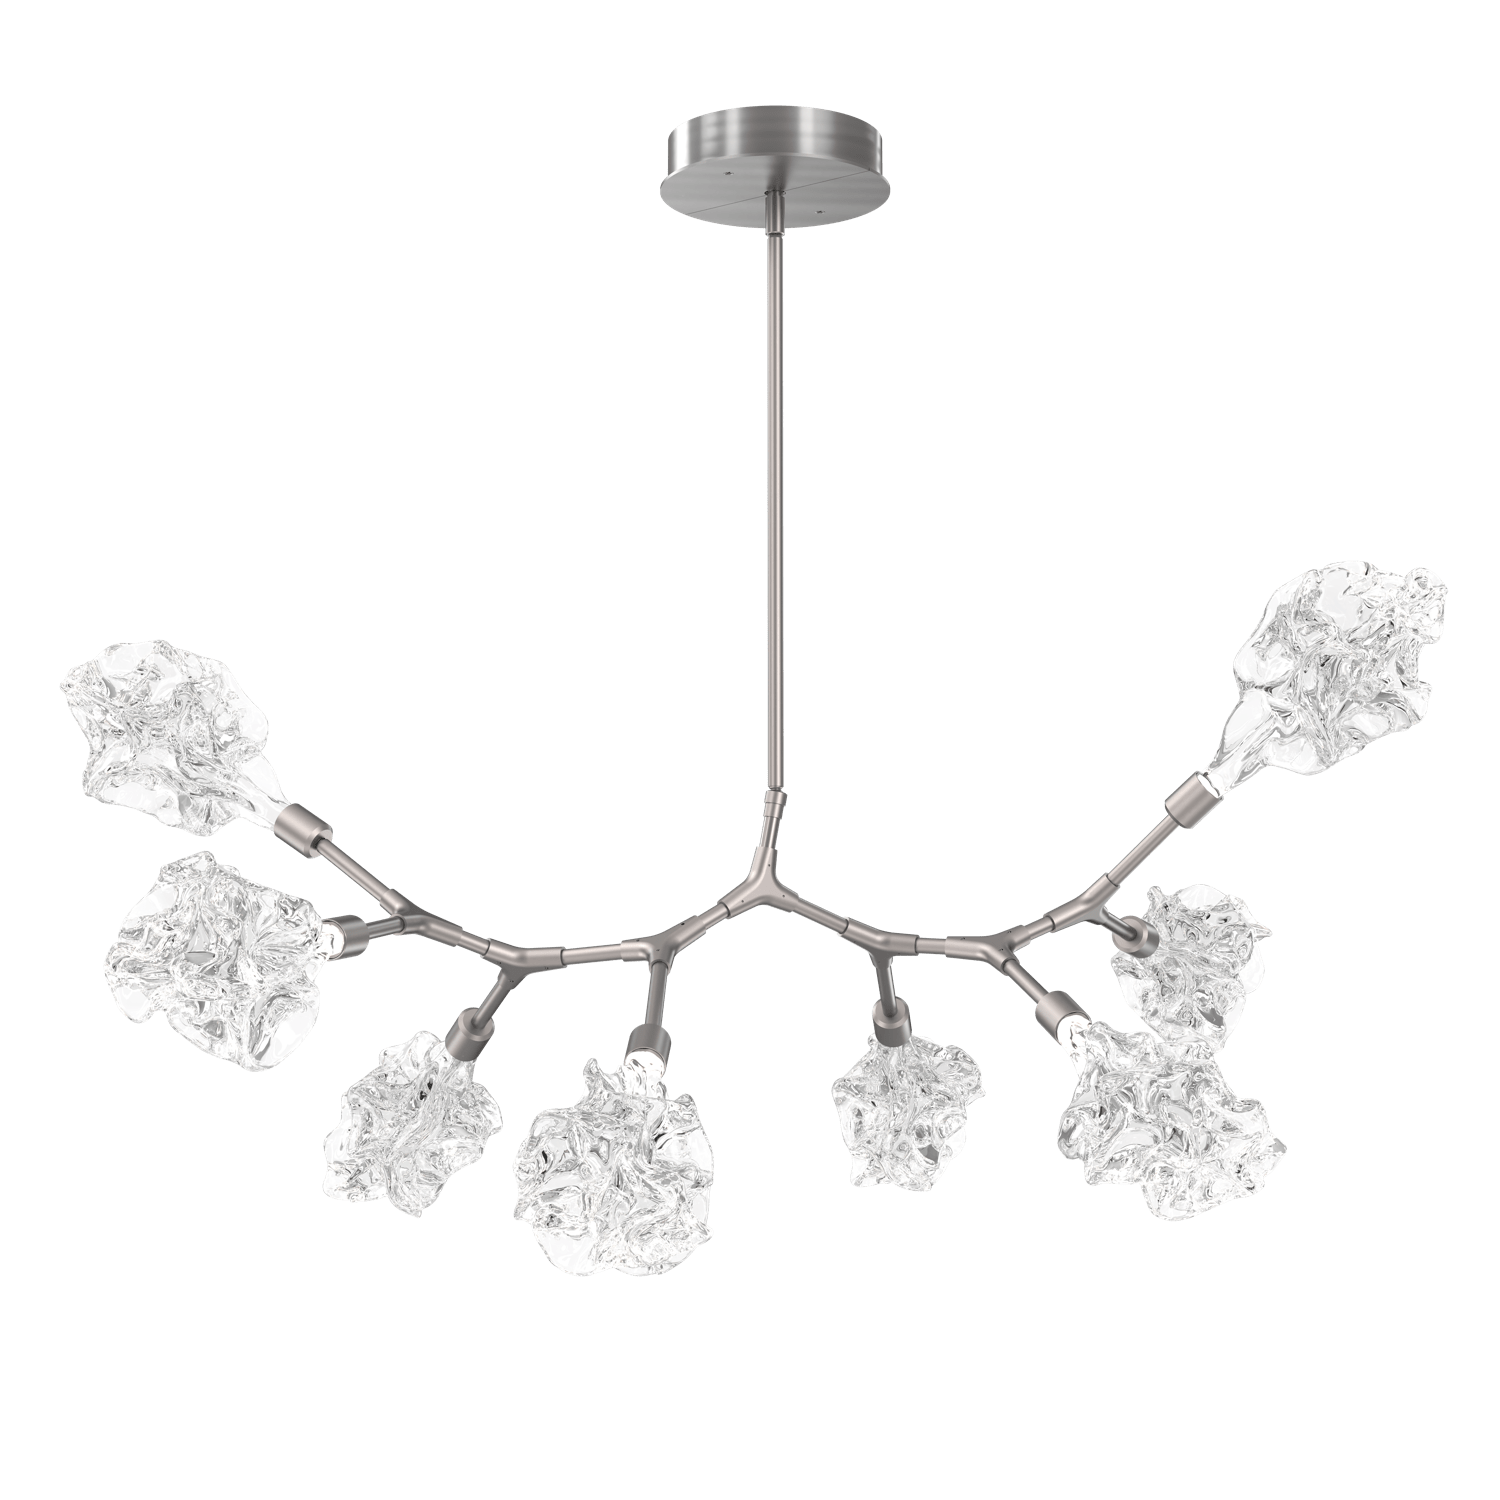 PLB0059-BB-SN-Hammerton-Studio-Blossom-8-light-organic-branch-chandelier-with-satin-nickel-finish-and-clear-handblown-crystal-glass-shades-and-LED-lamping